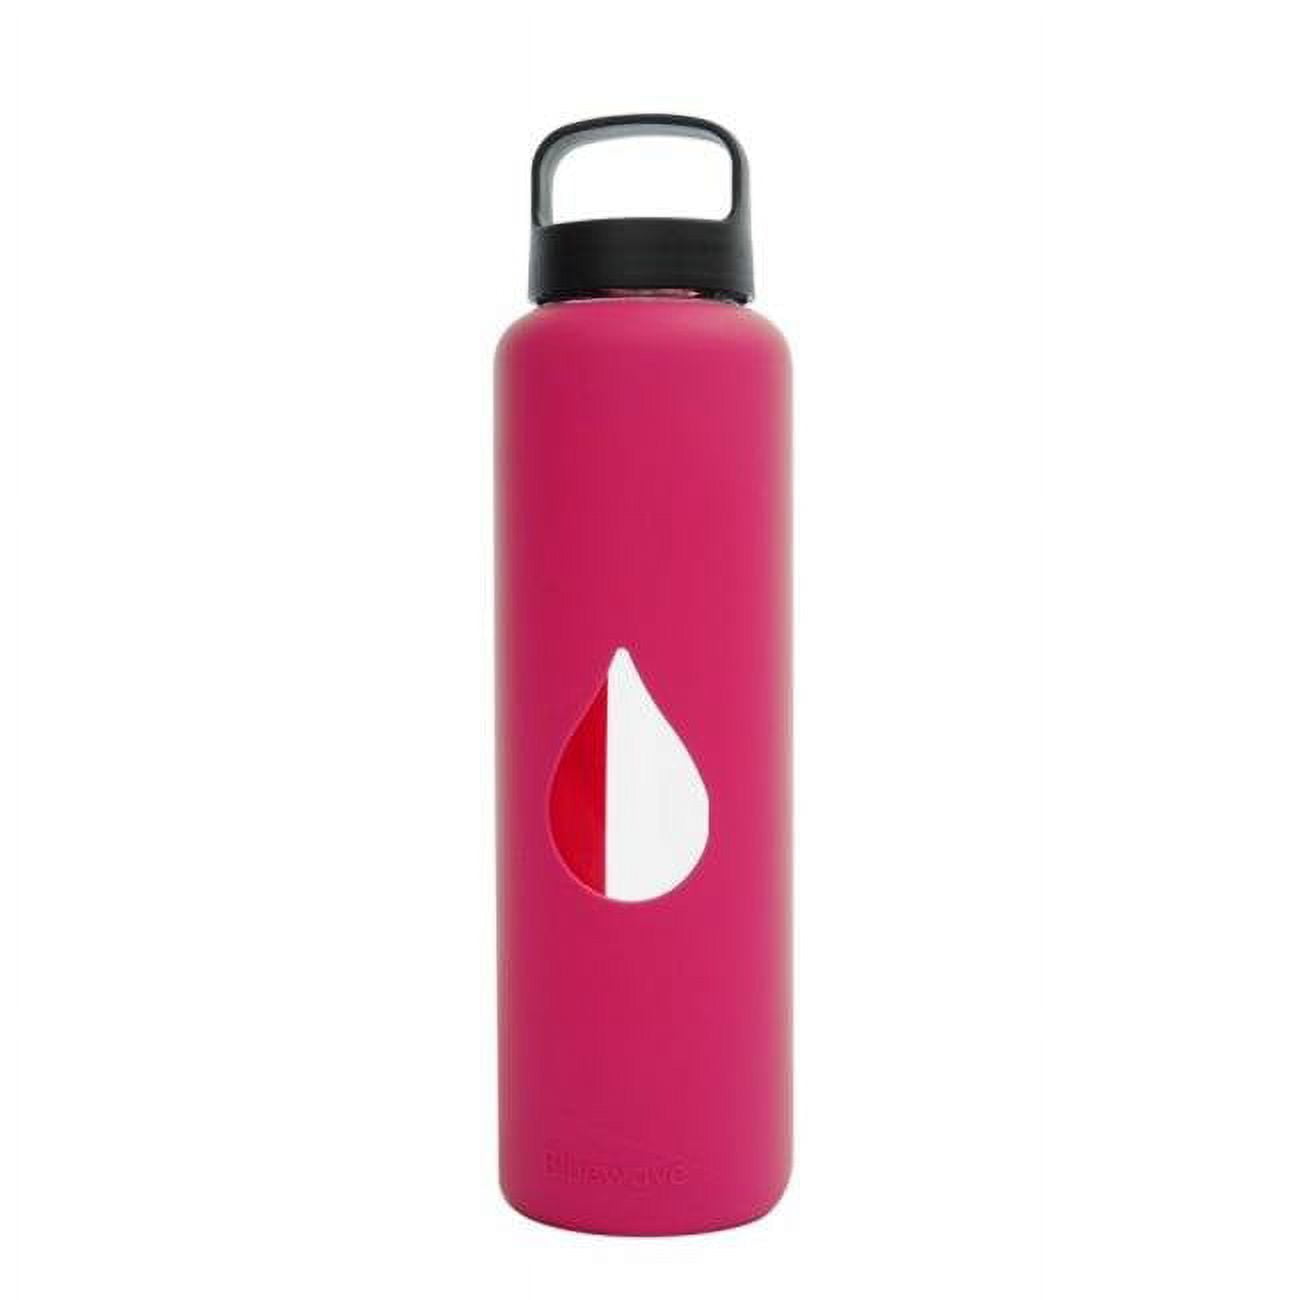 Gg150lc-pink 750ml Reusable Glass Water Bottle With Loop Cap And Free Silicone Sleeve - Candy